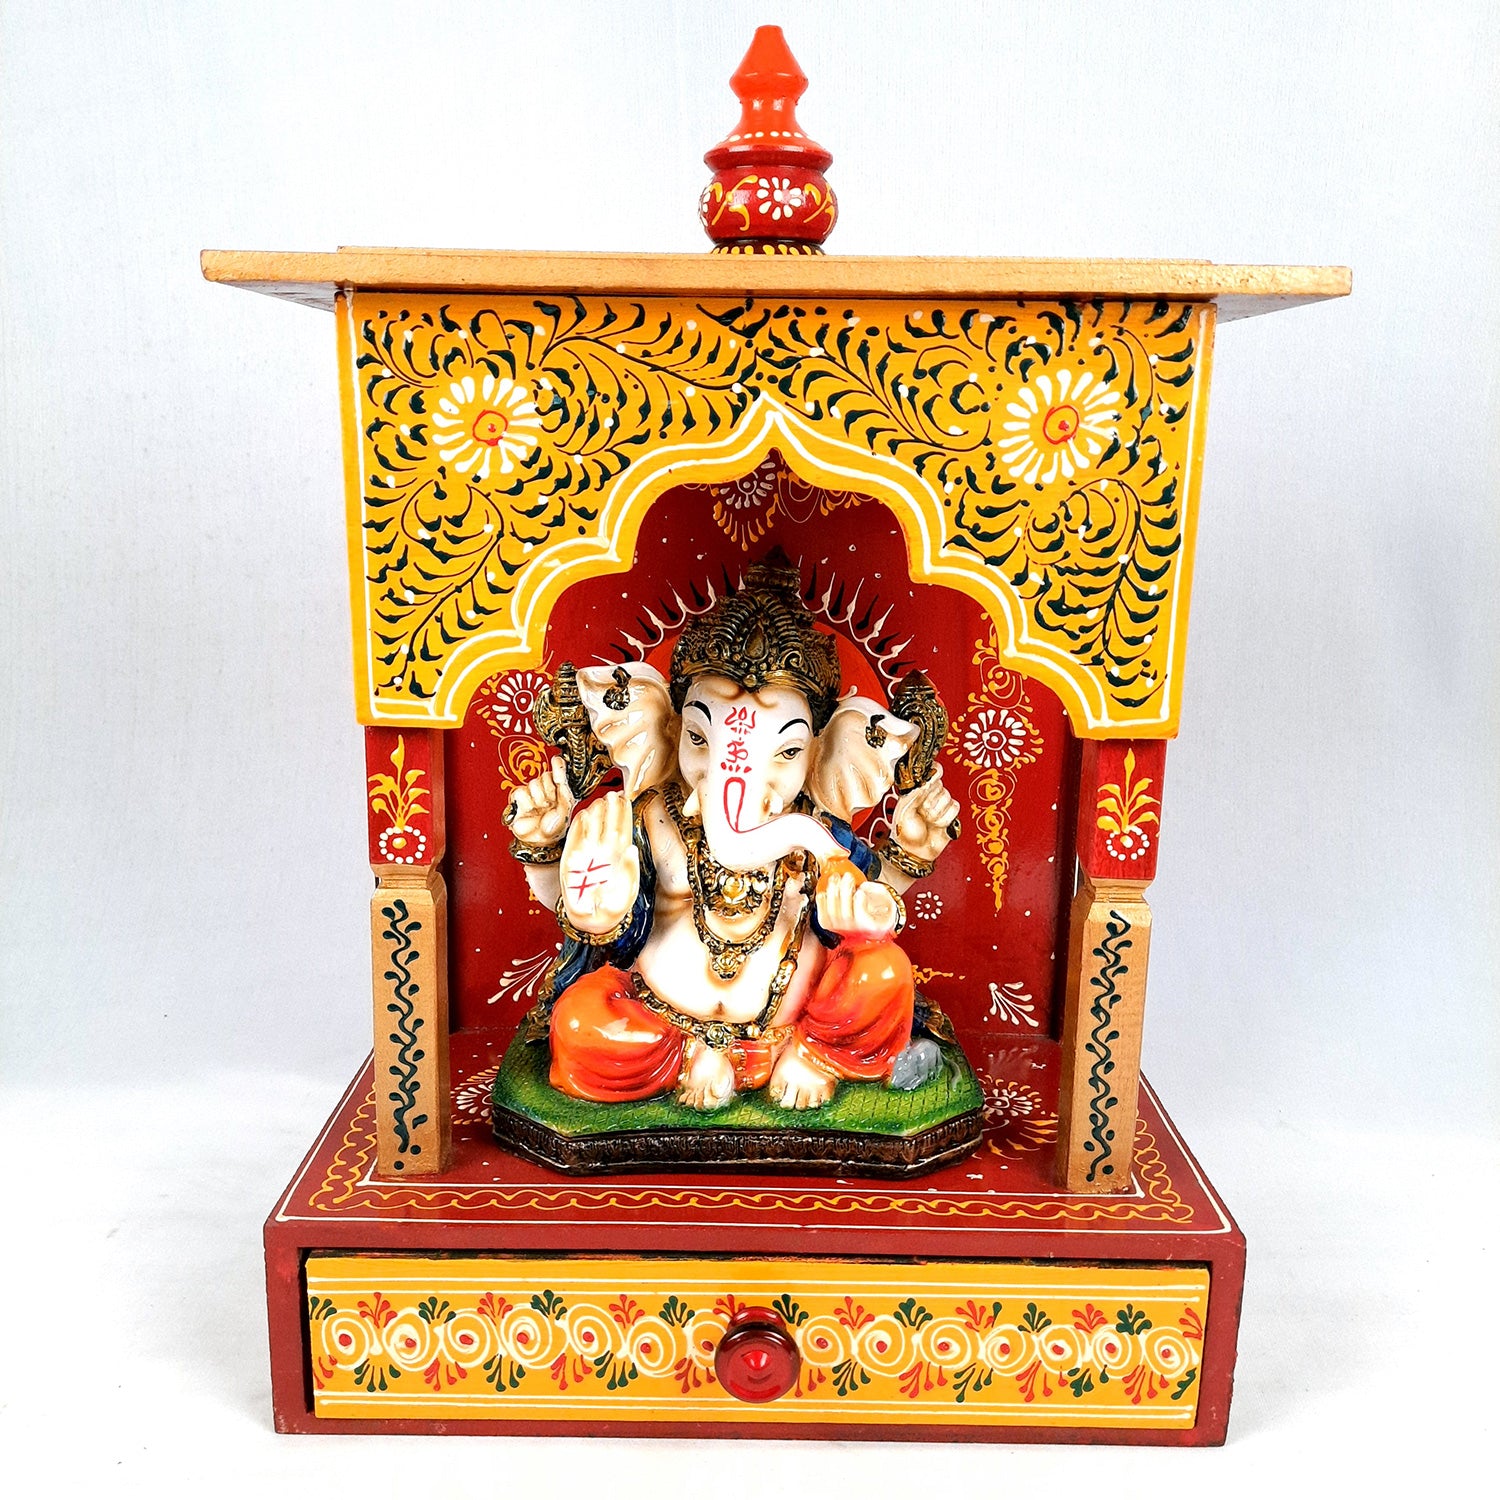 Pooja Temple Wooden With Storage Drawer | Mandir For Home | Puja Stand / Mandap Wall Mounted - For Religious Decor, House, Ghar, Office, Shop - Apkamart #Size_17 inch